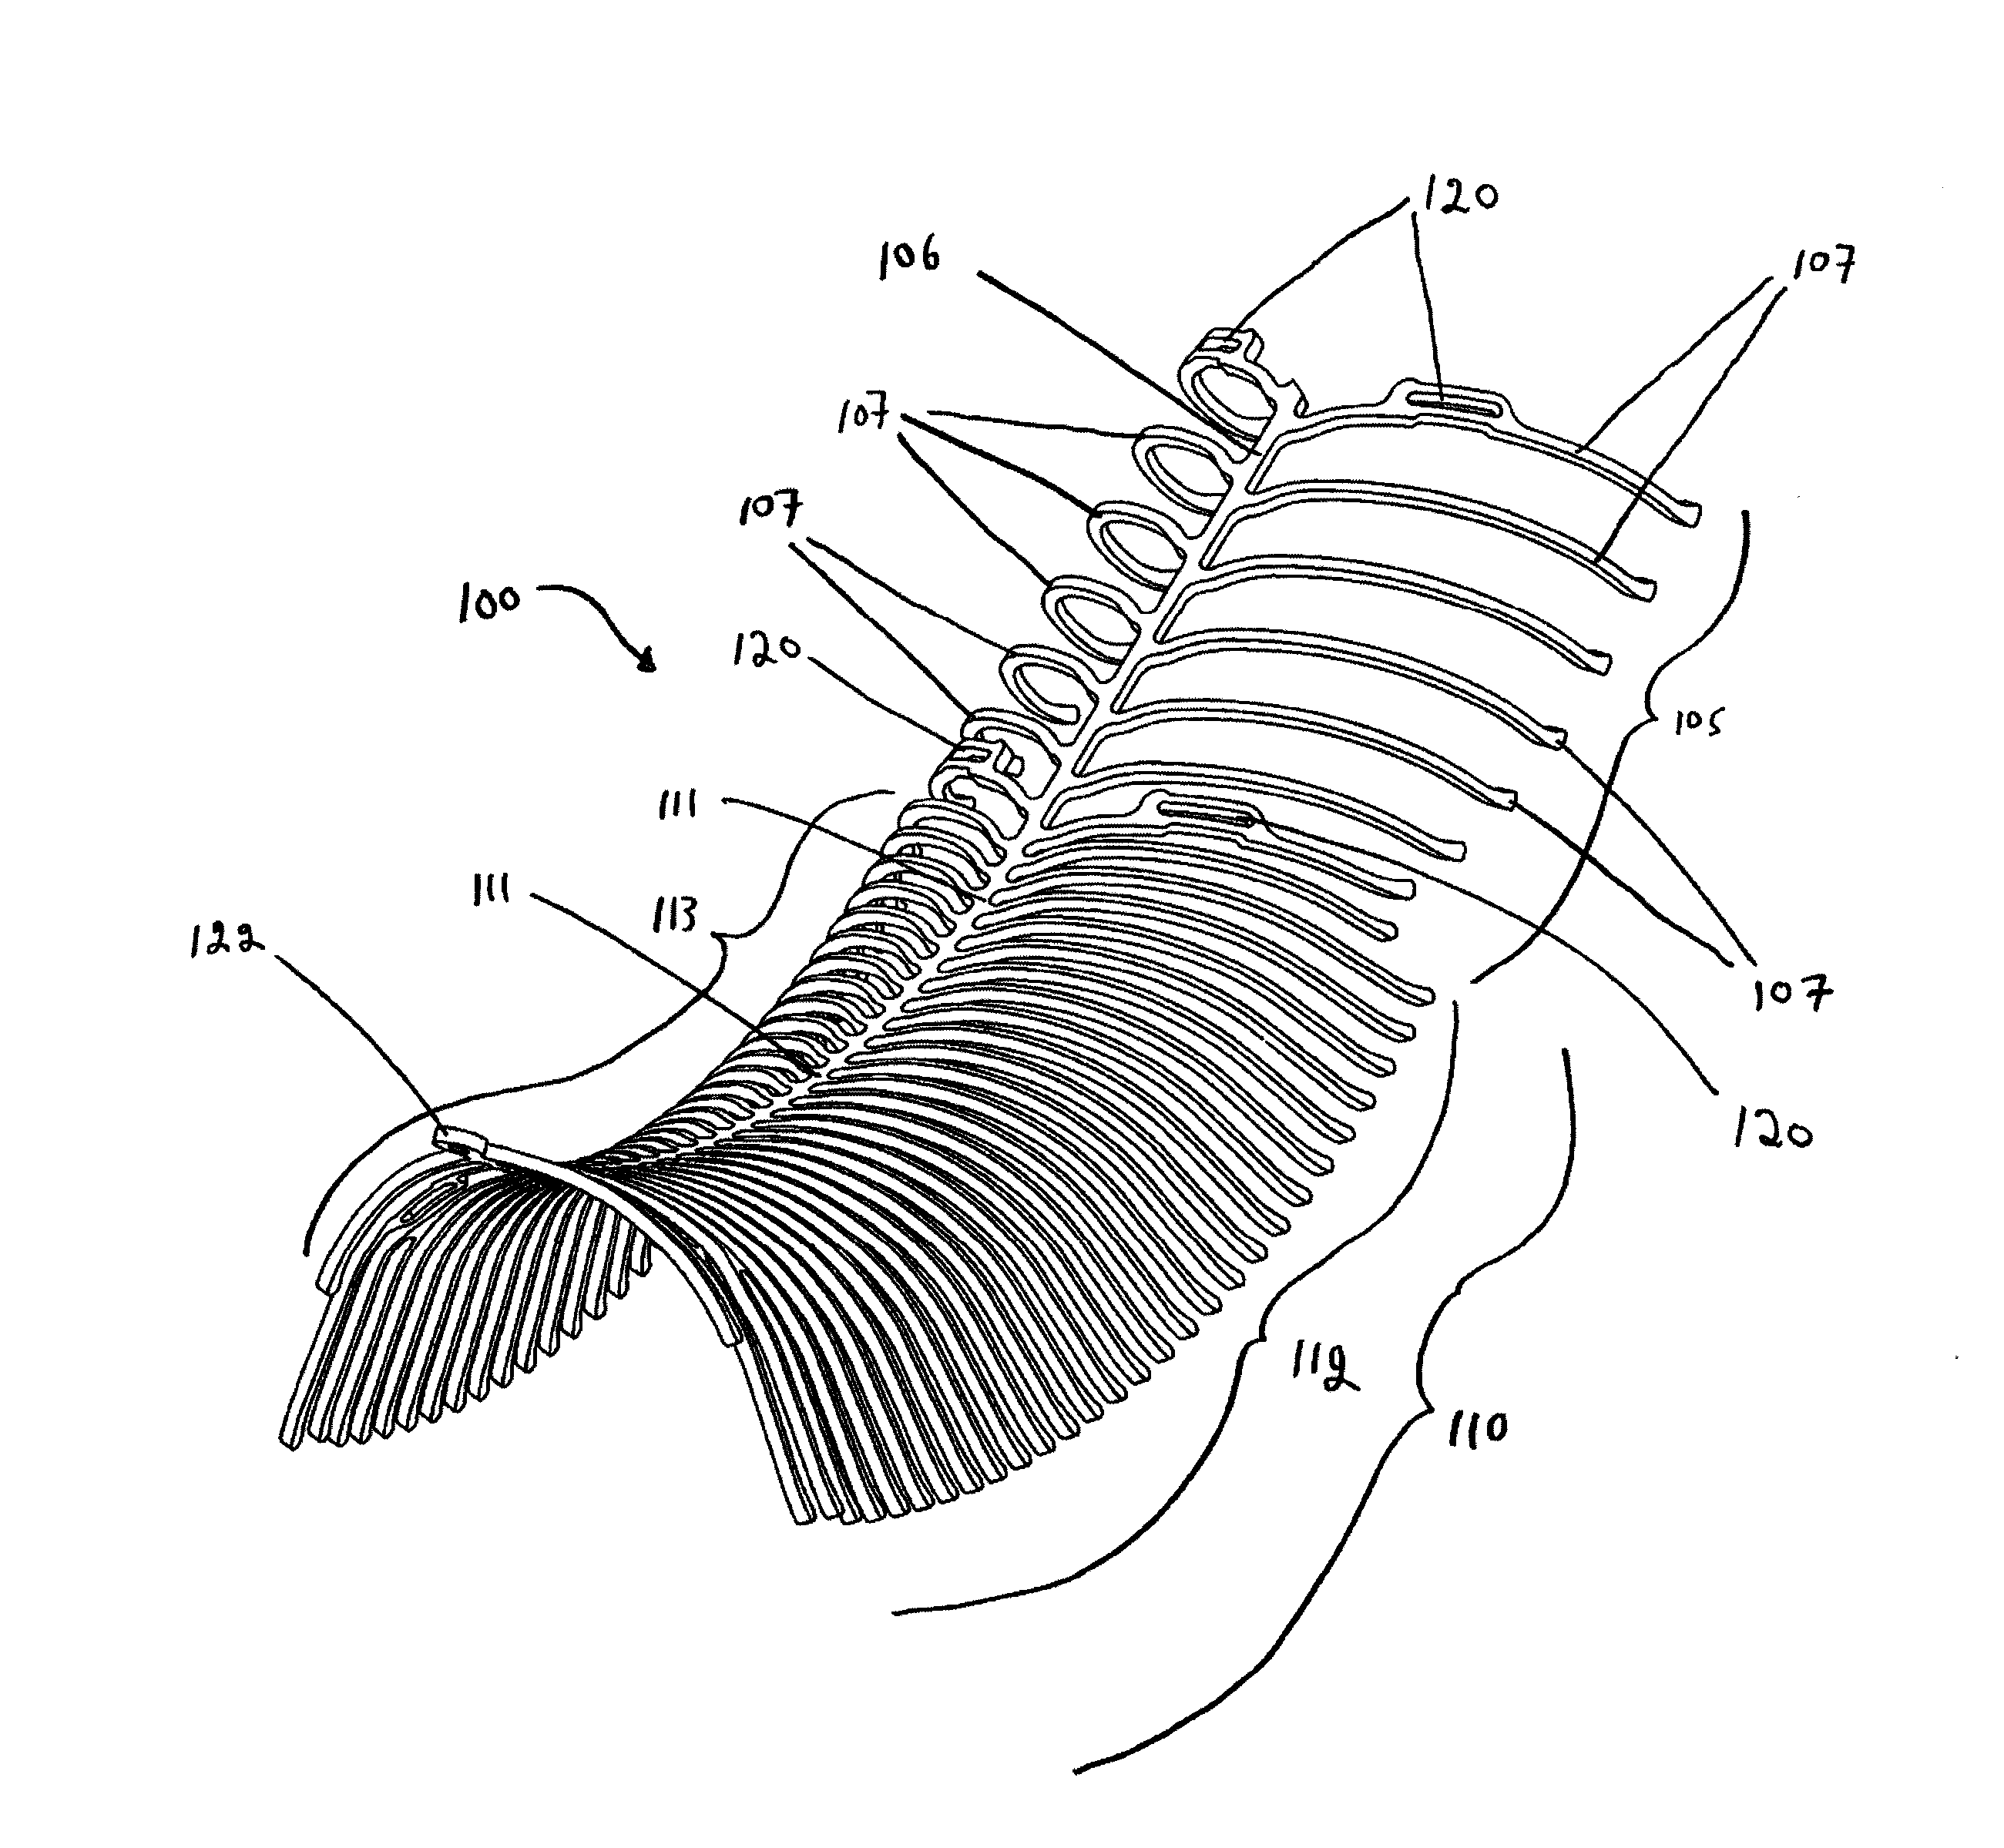 Endovascular prosthesis and method for delivery of an endovascular prosthesis